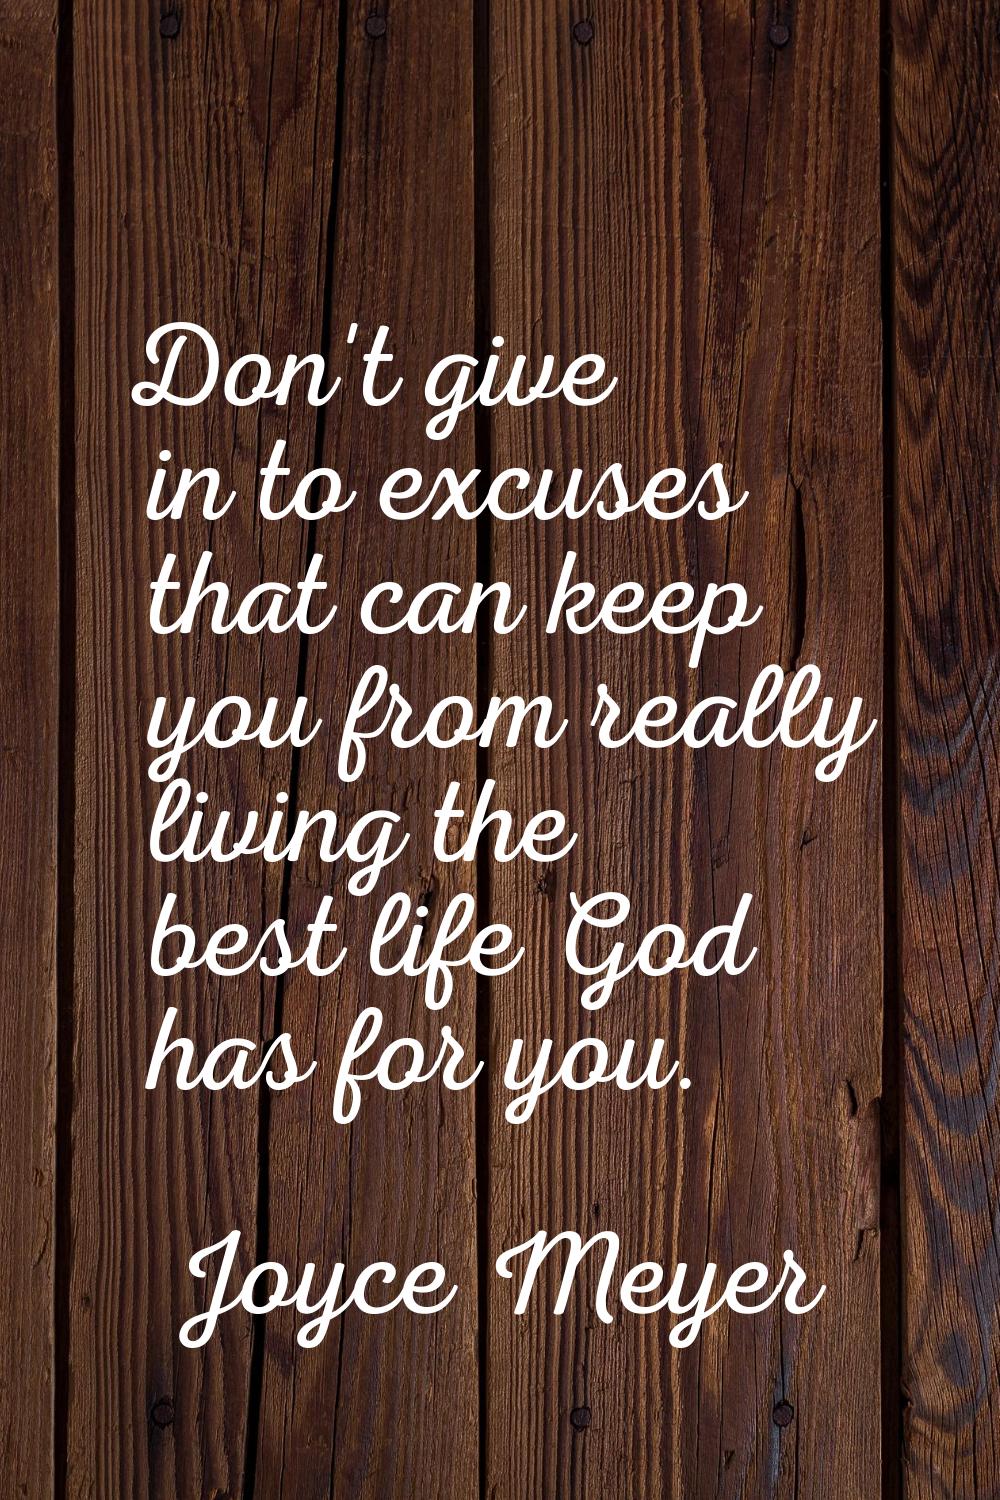 Don't give in to excuses that can keep you from really living the best life God has for you.